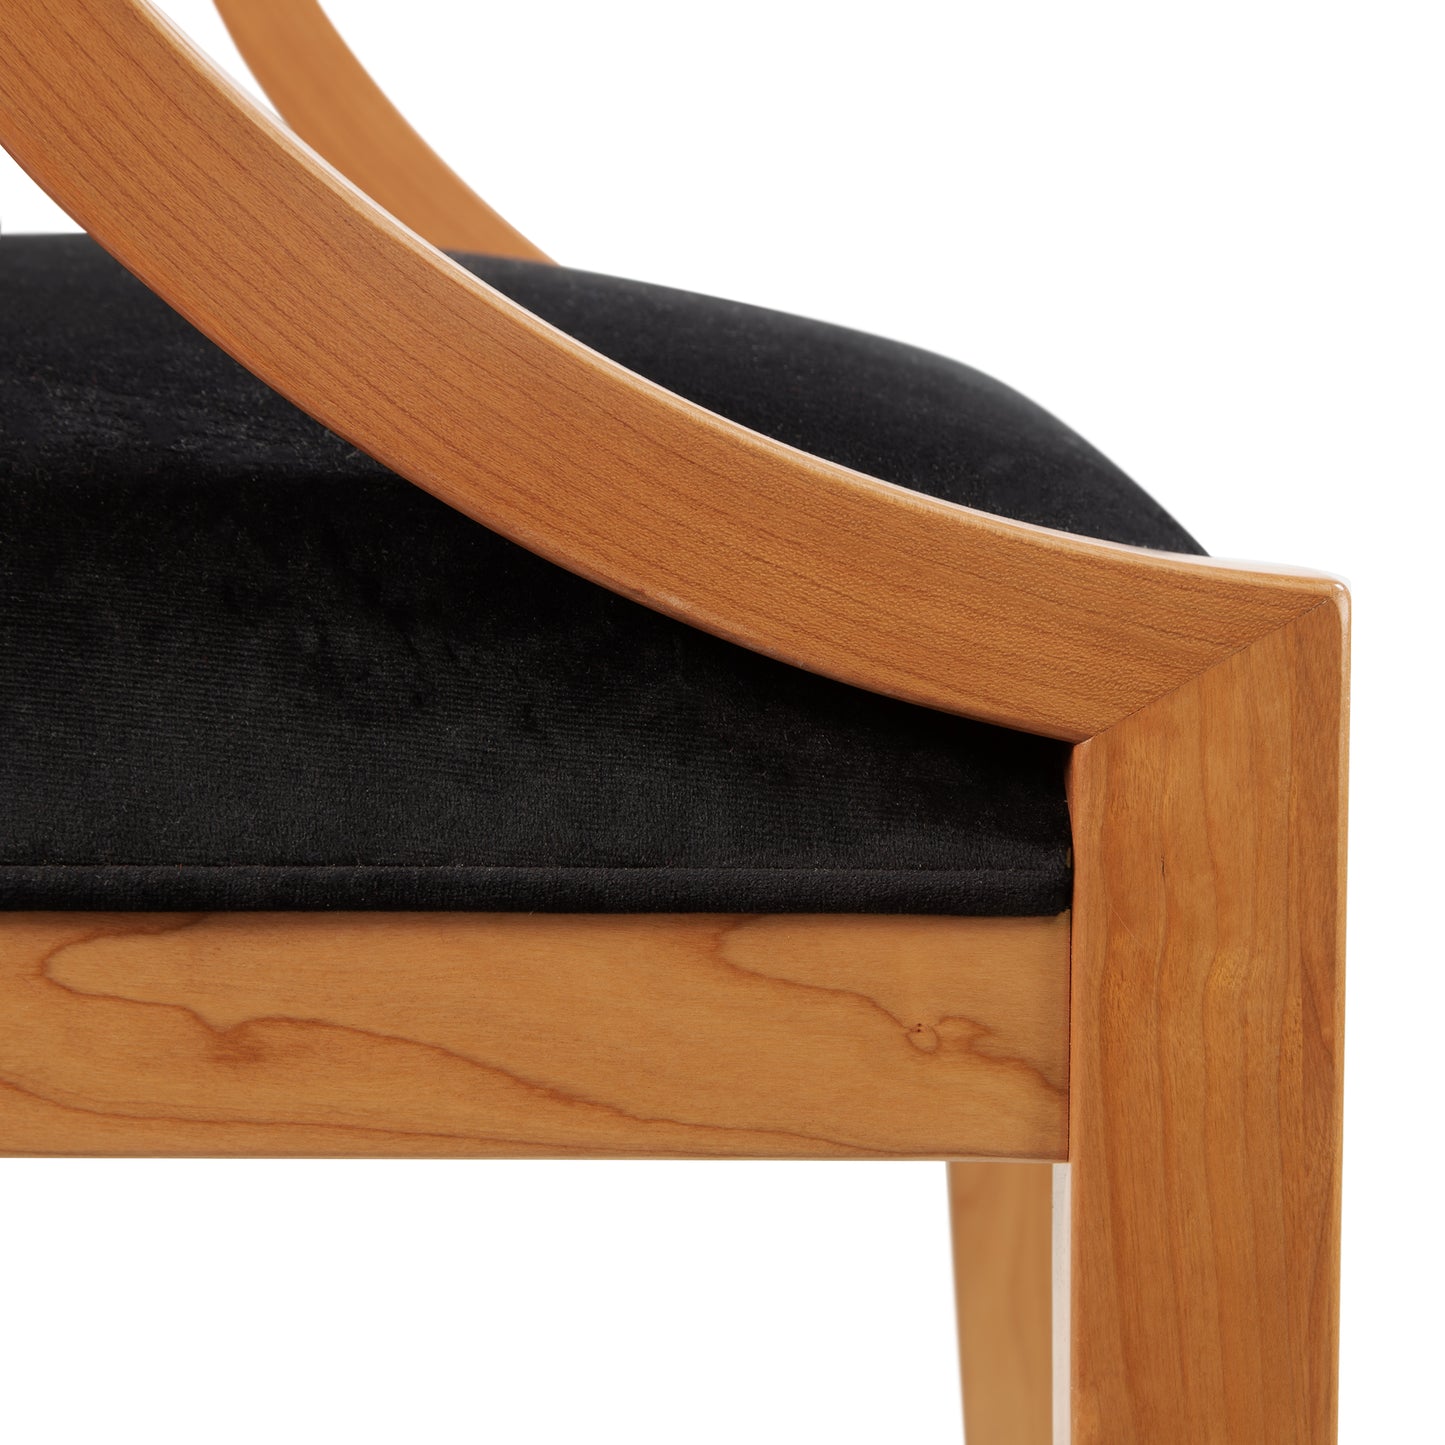 Close-up view of a Dorset Chair by Vermont Woods Studios with a sleek design, featuring a smooth natural cherry frame and black upholstered seat cushion.